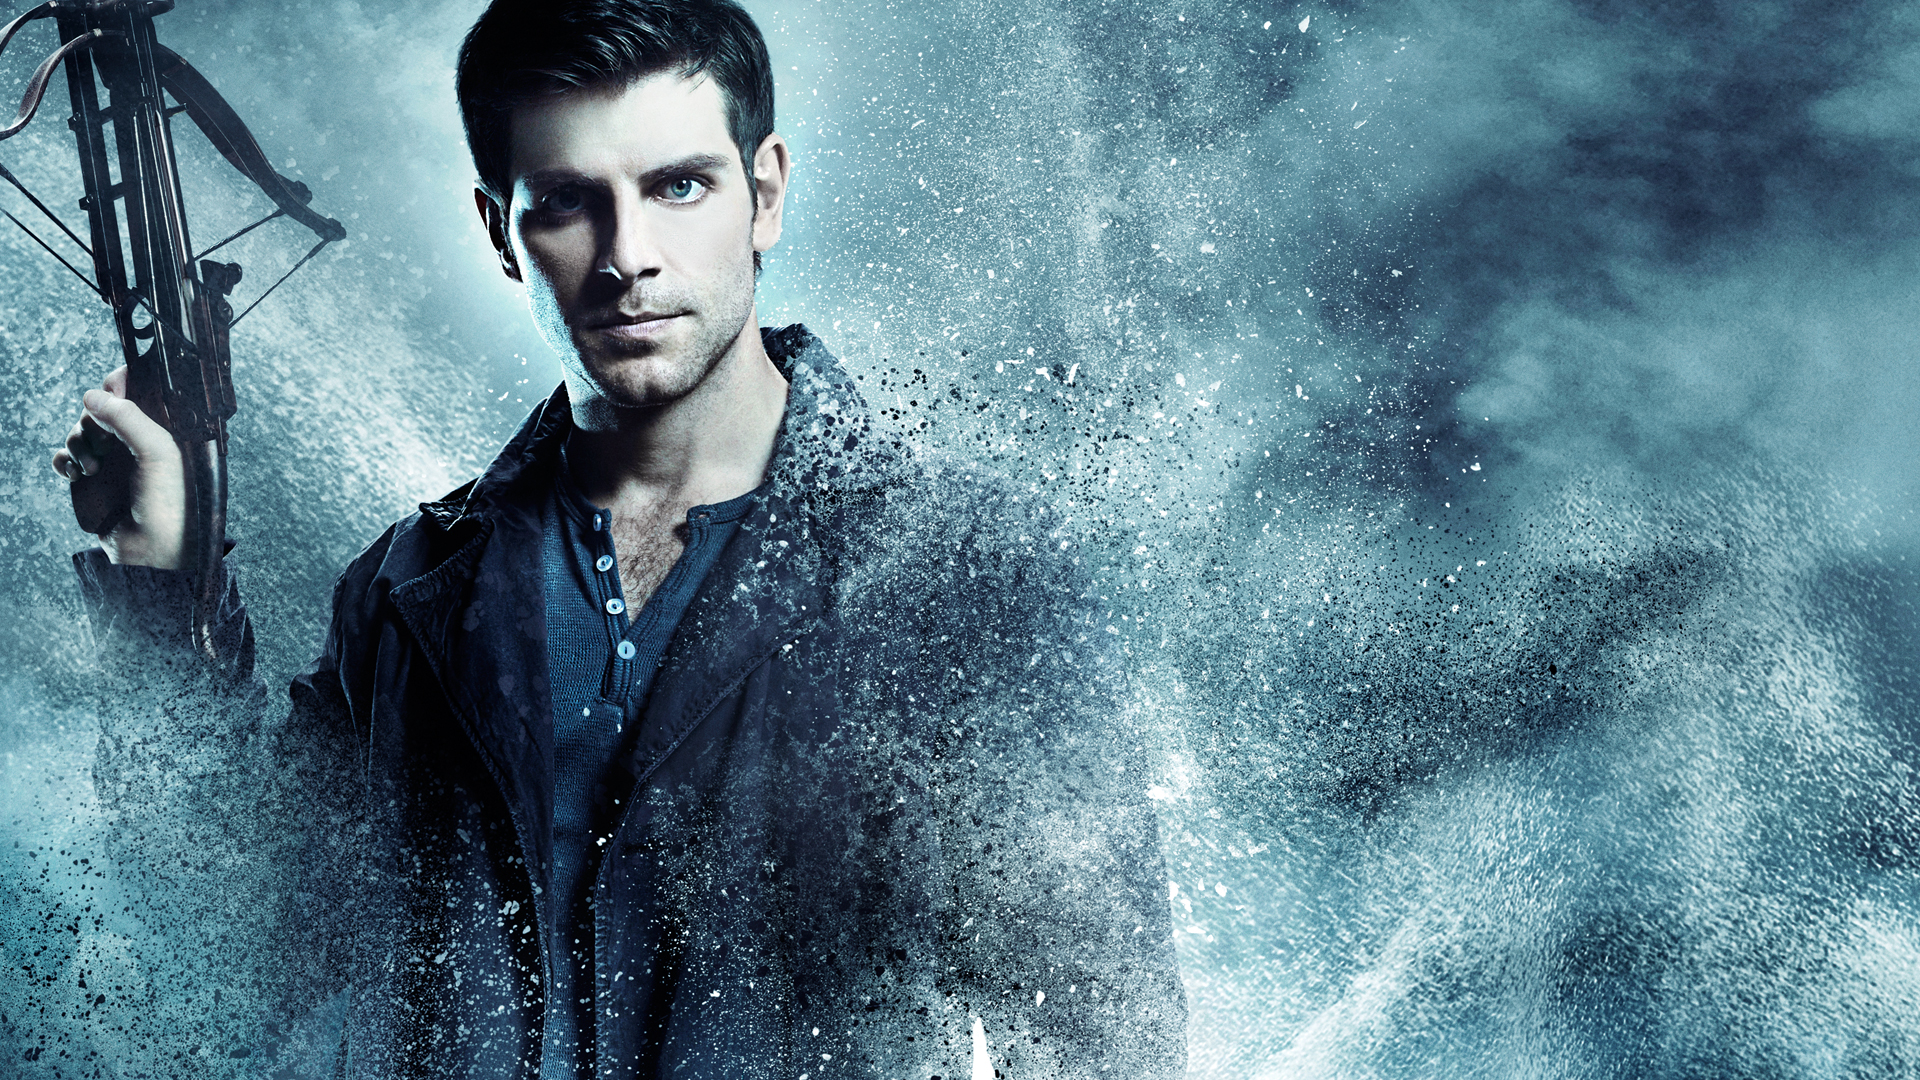 Grimm to End After Season 6